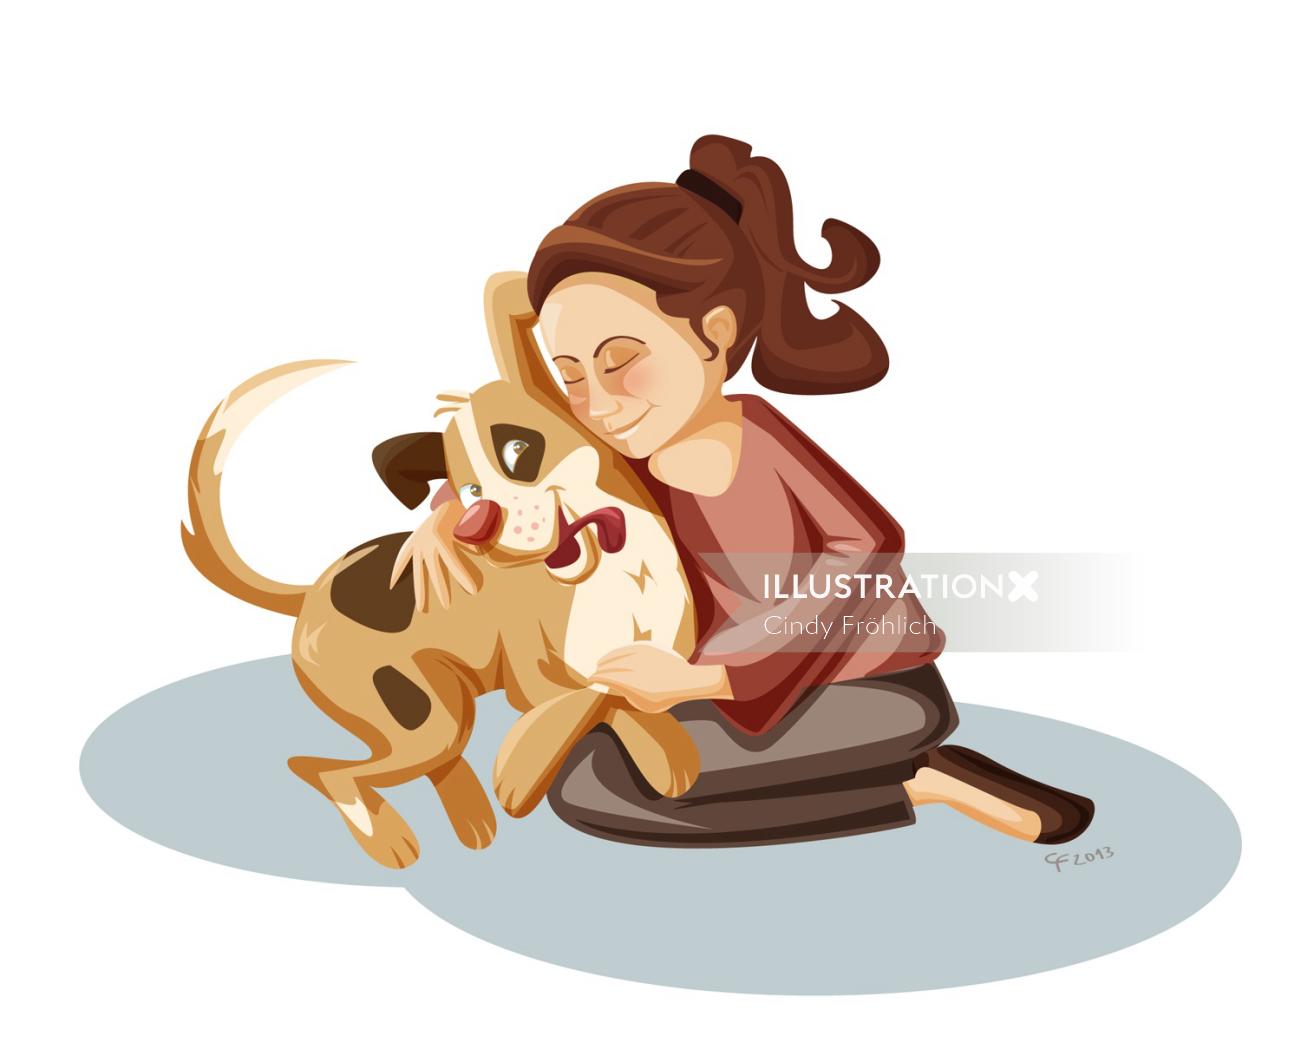 Children illustration of woman and dog
